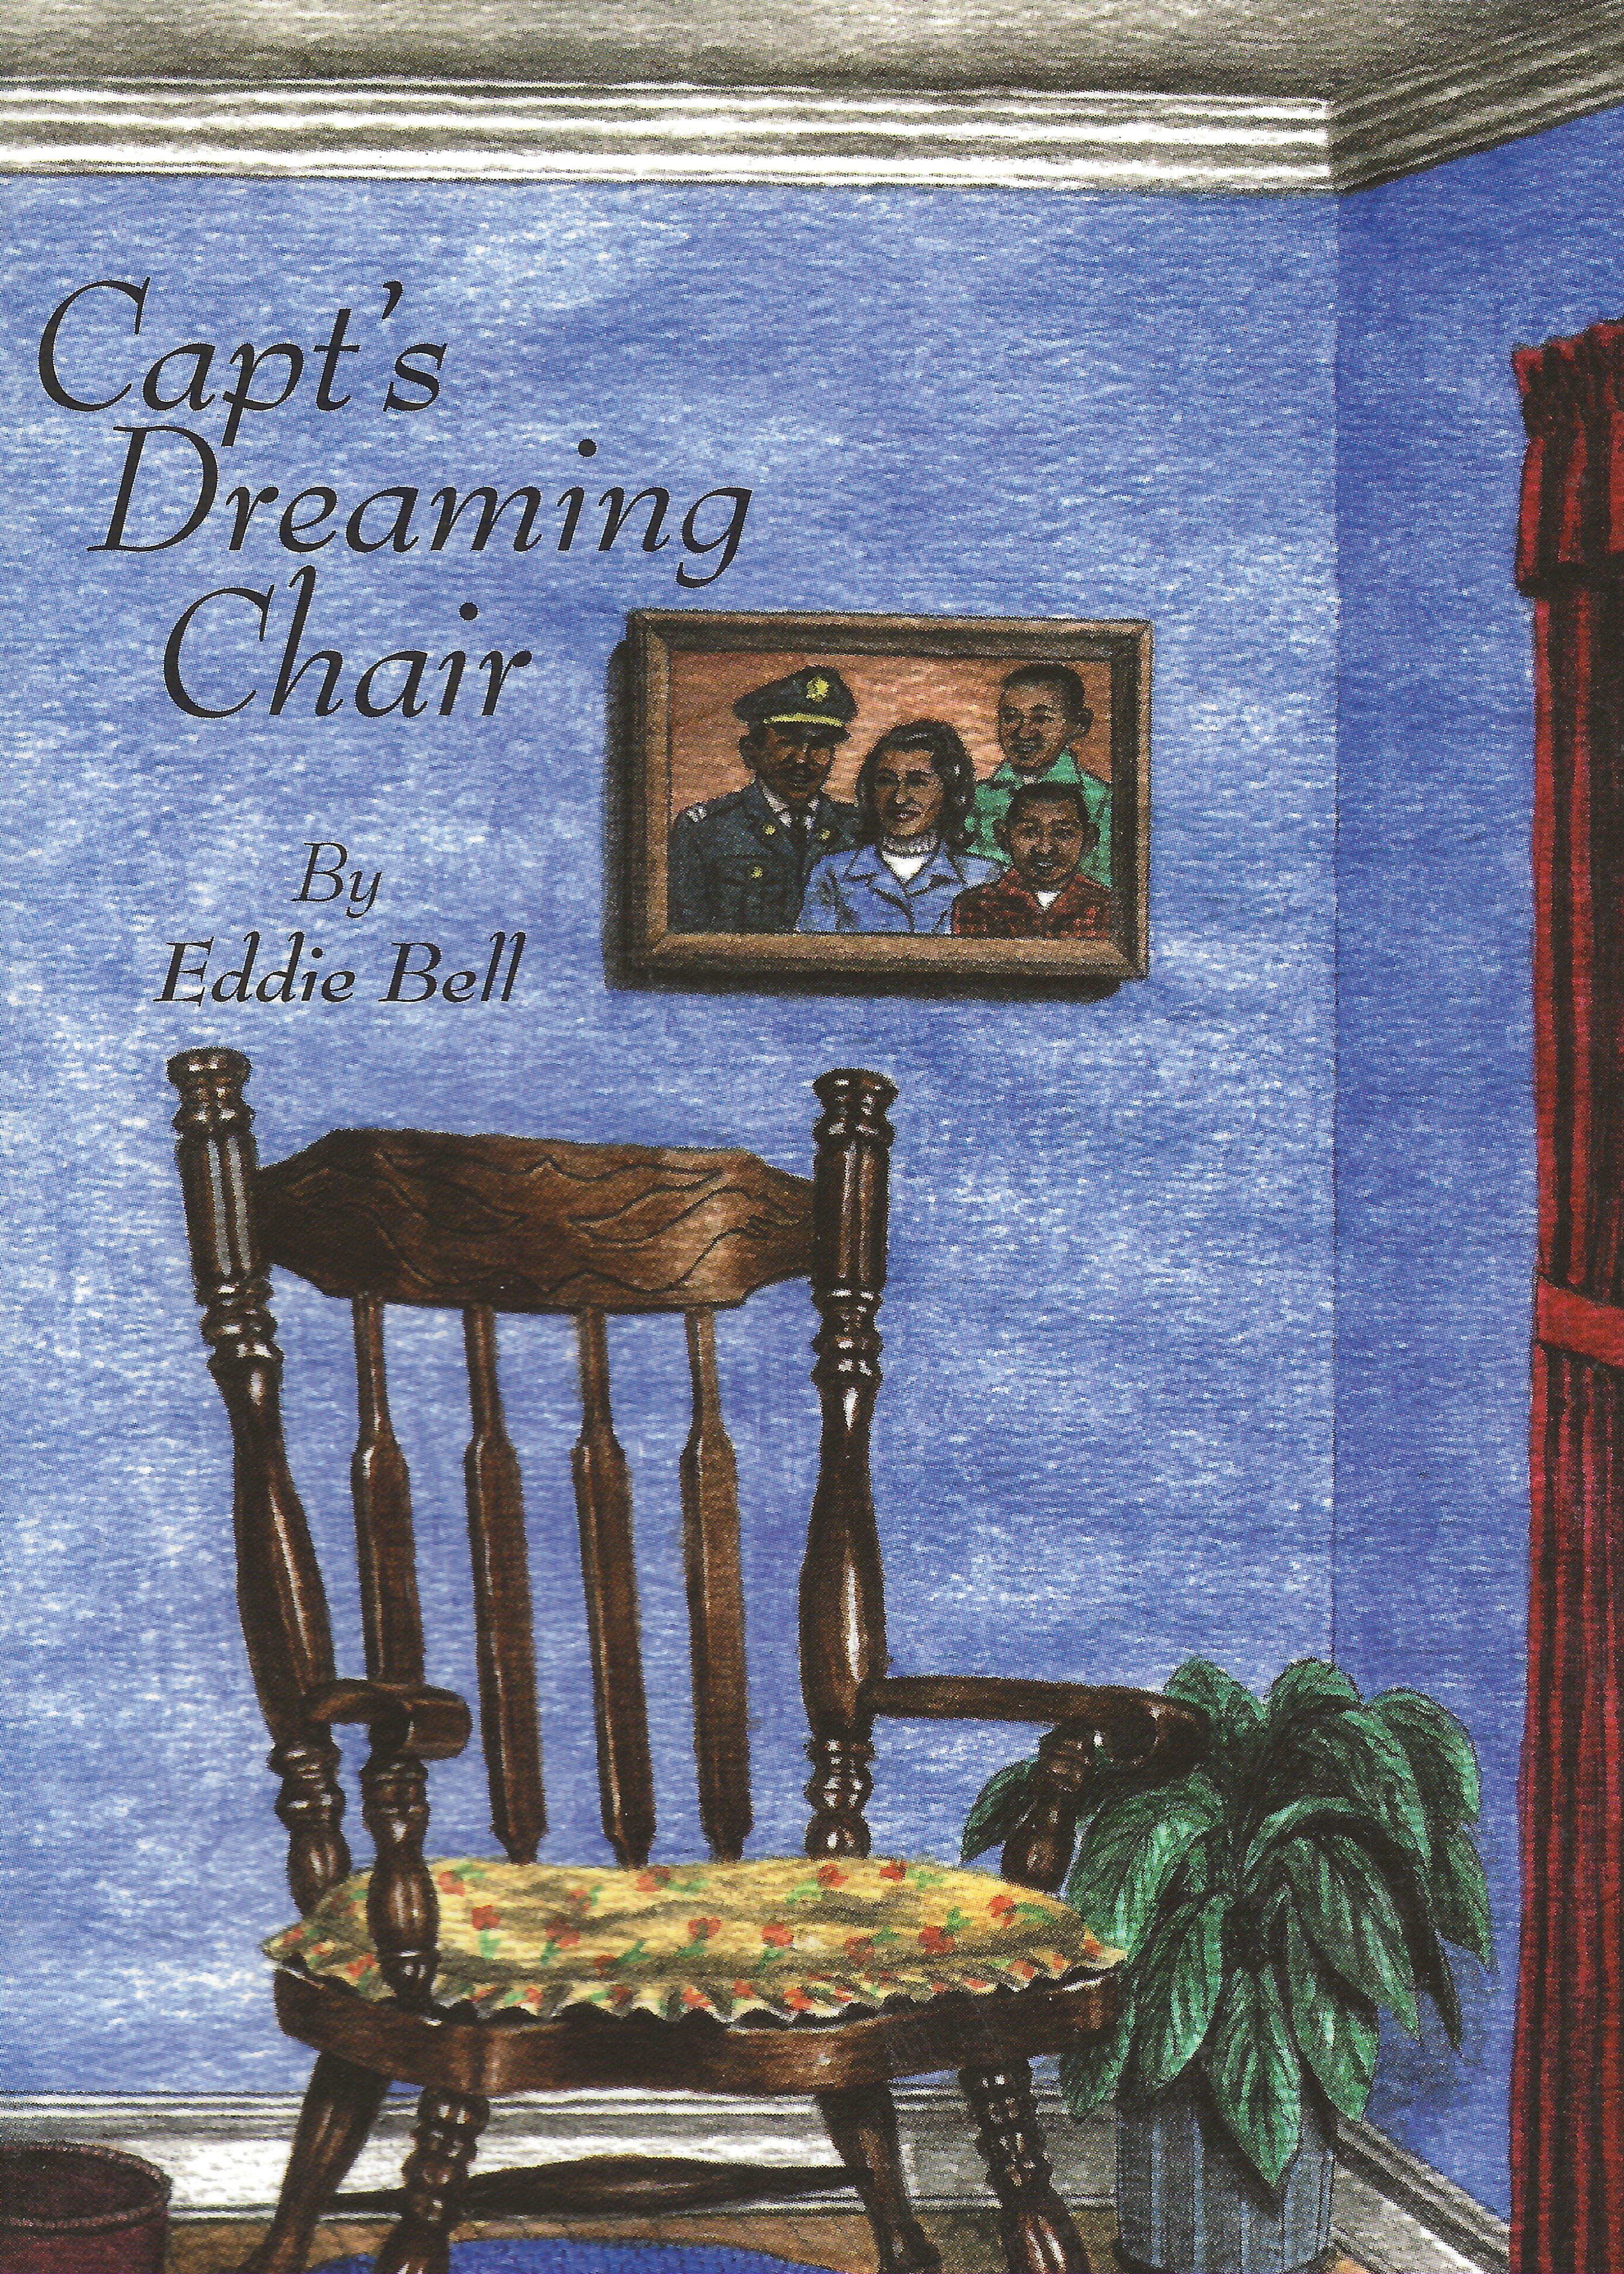 CAPT'S DREAMING CHAIR